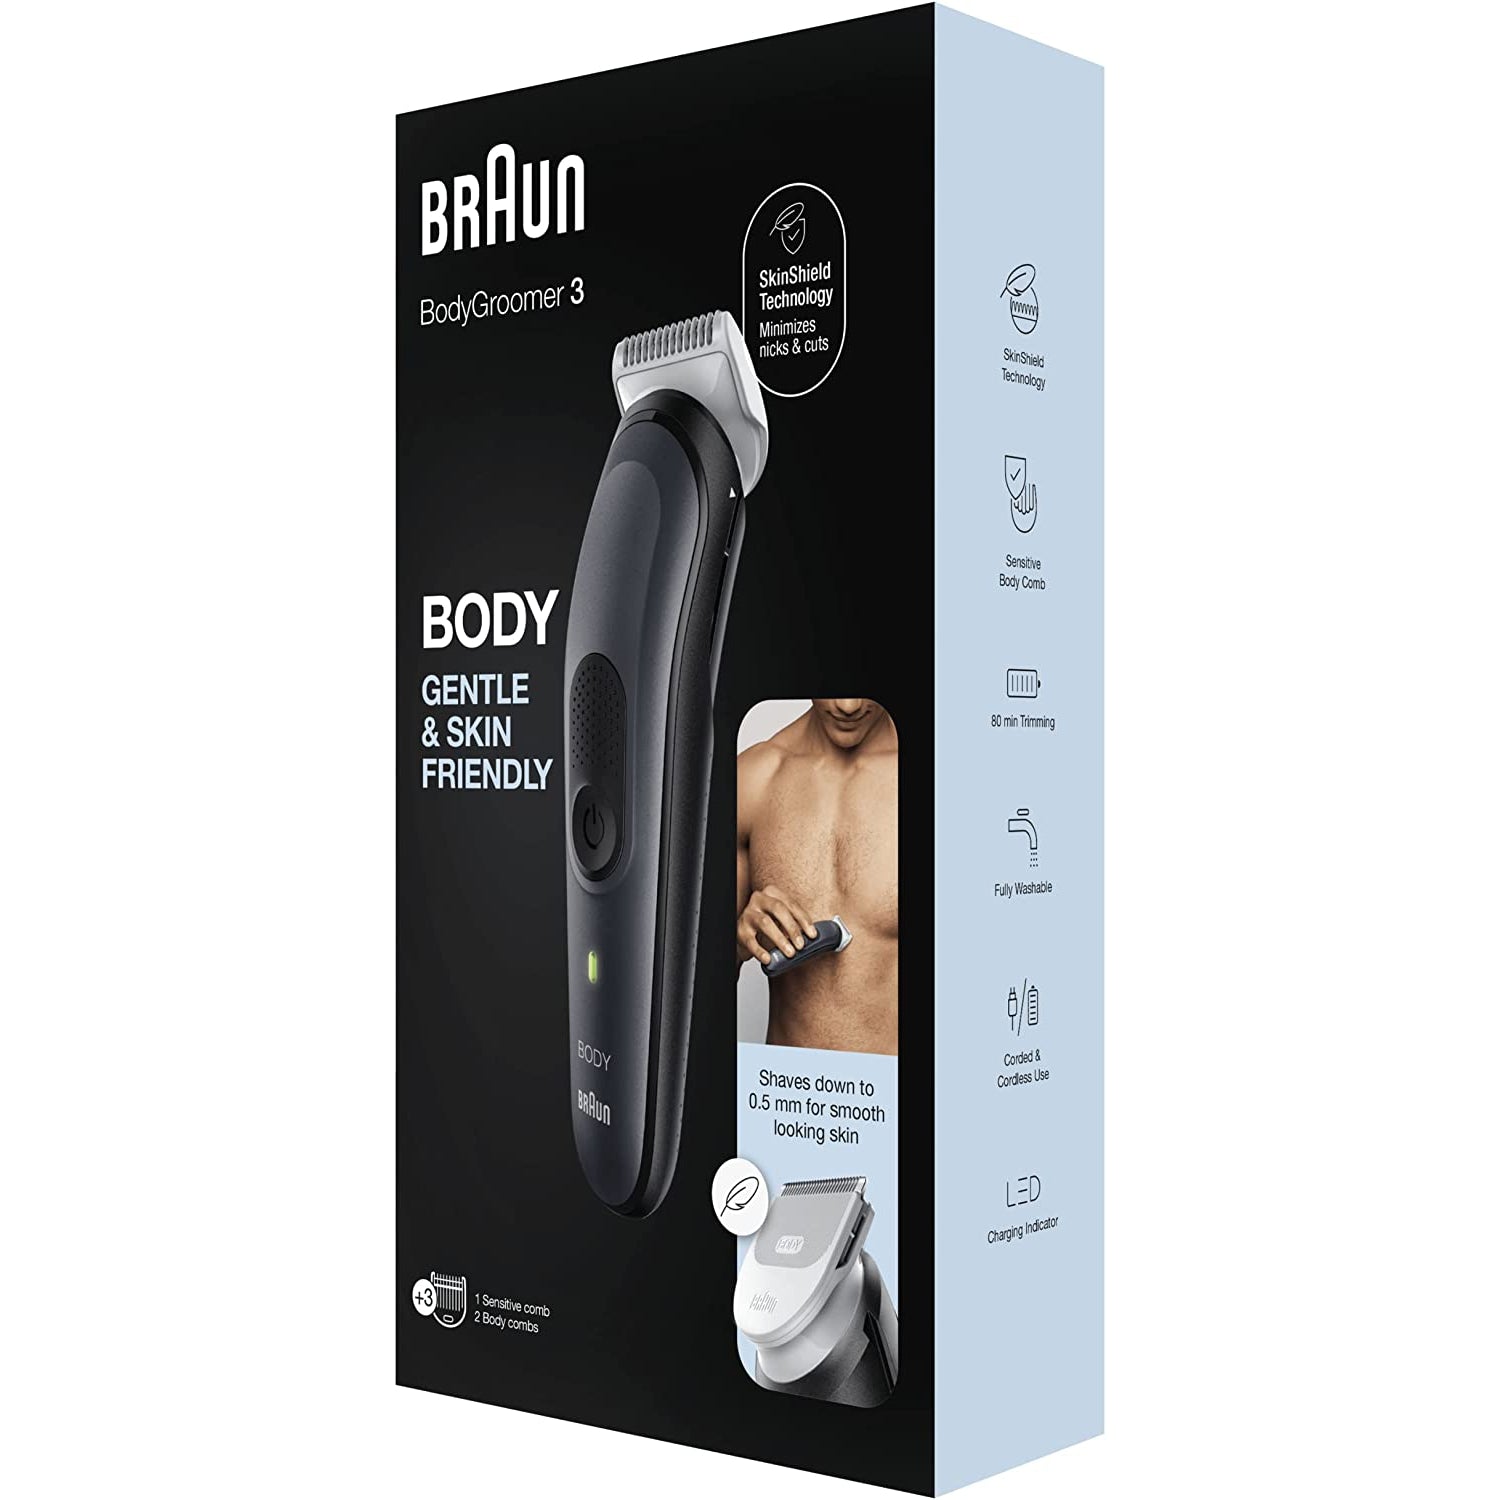 Braun Body Groomer 3 BG3350, Manscaping Tool for Men, with SkinShield Technology - Healthxpress.ie